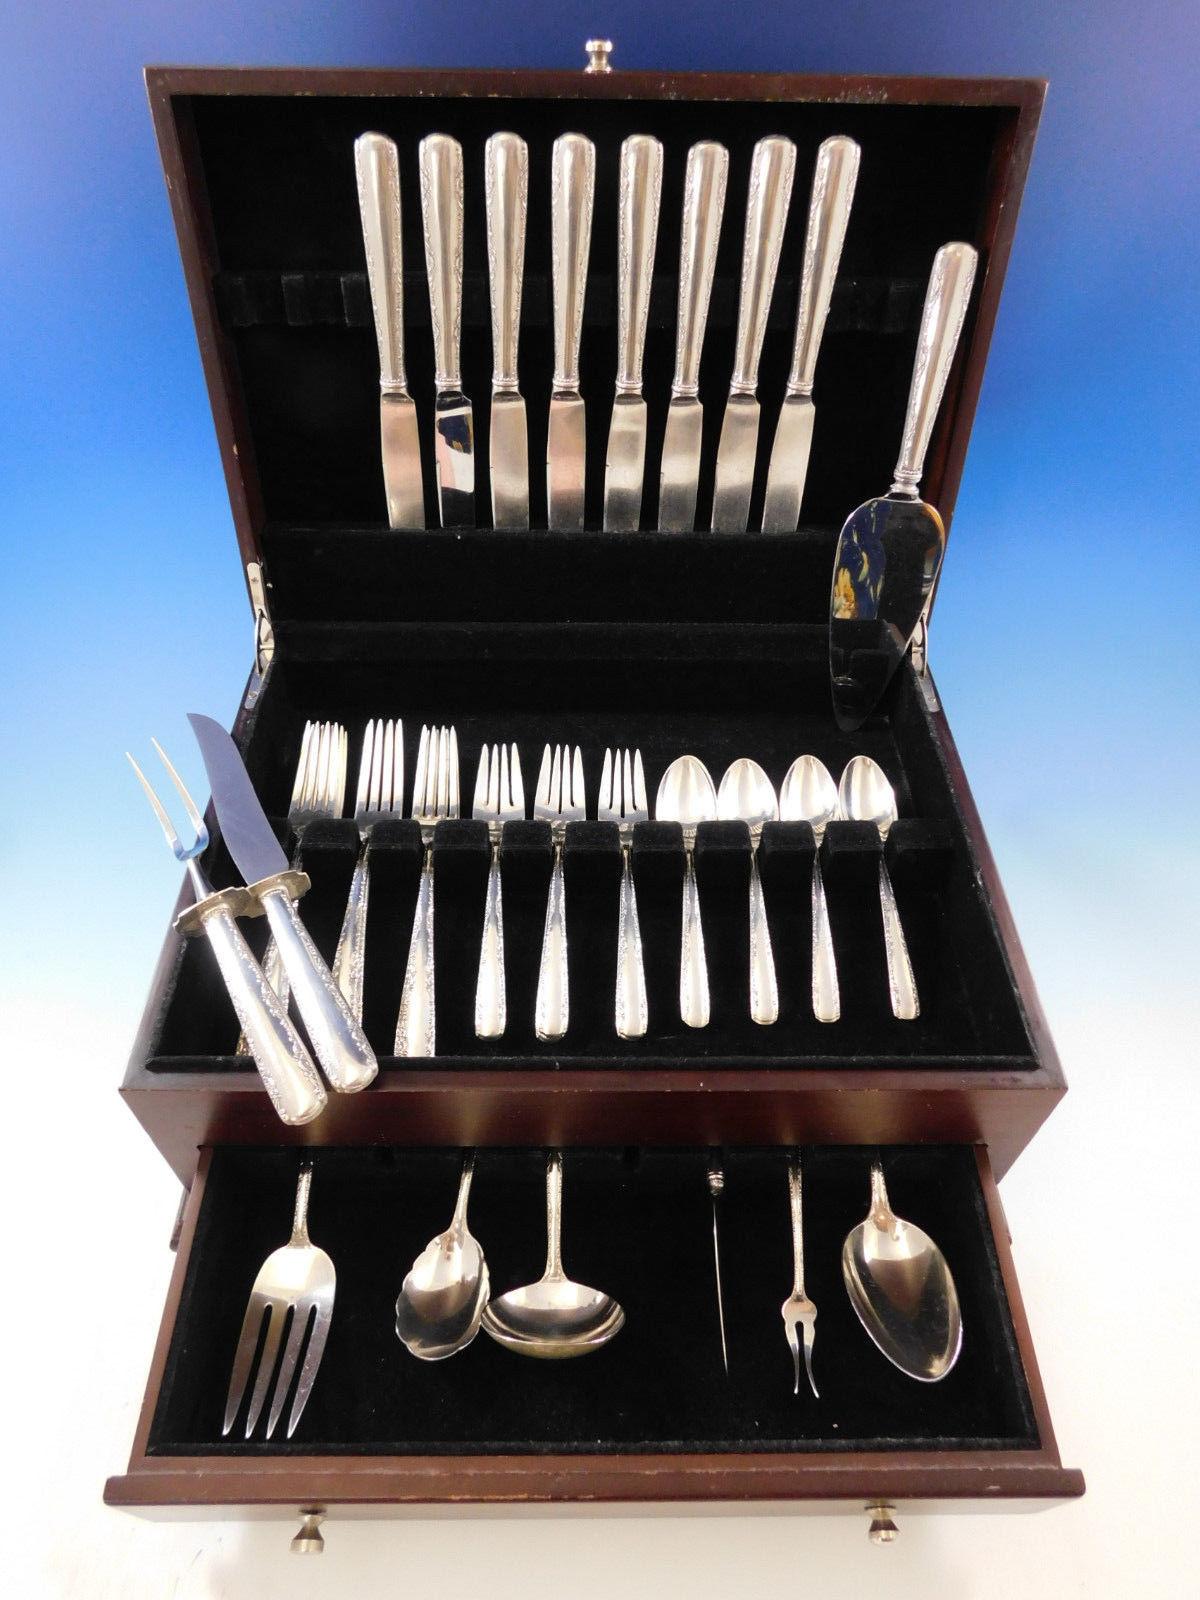 Camellia by Gorham sterling silver dinner size flatware set of 41 pieces. This set includes:

Eight dinner knives, 9 1/2